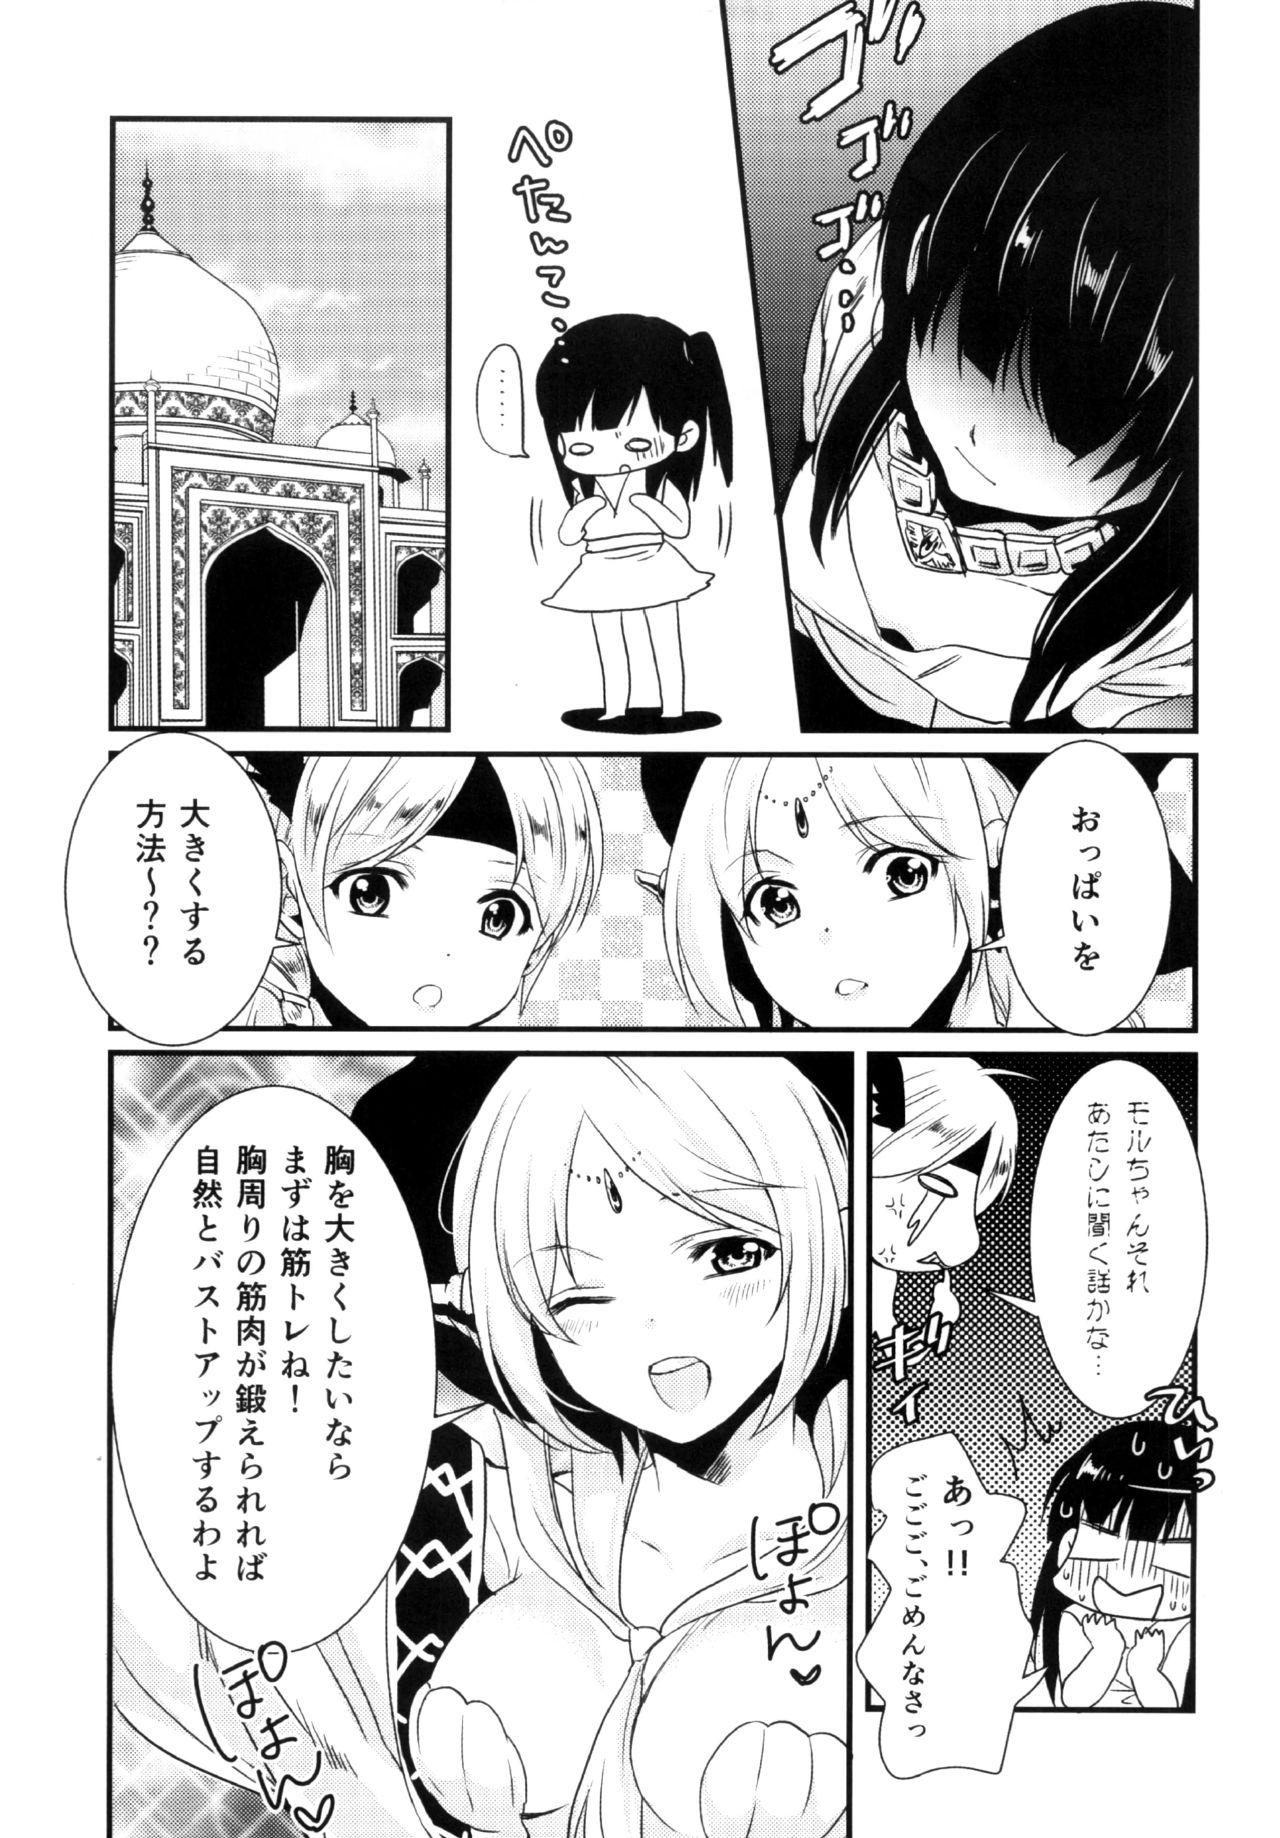 Indoor Himitsu - Magi the labyrinth of magic Chica - Page 5